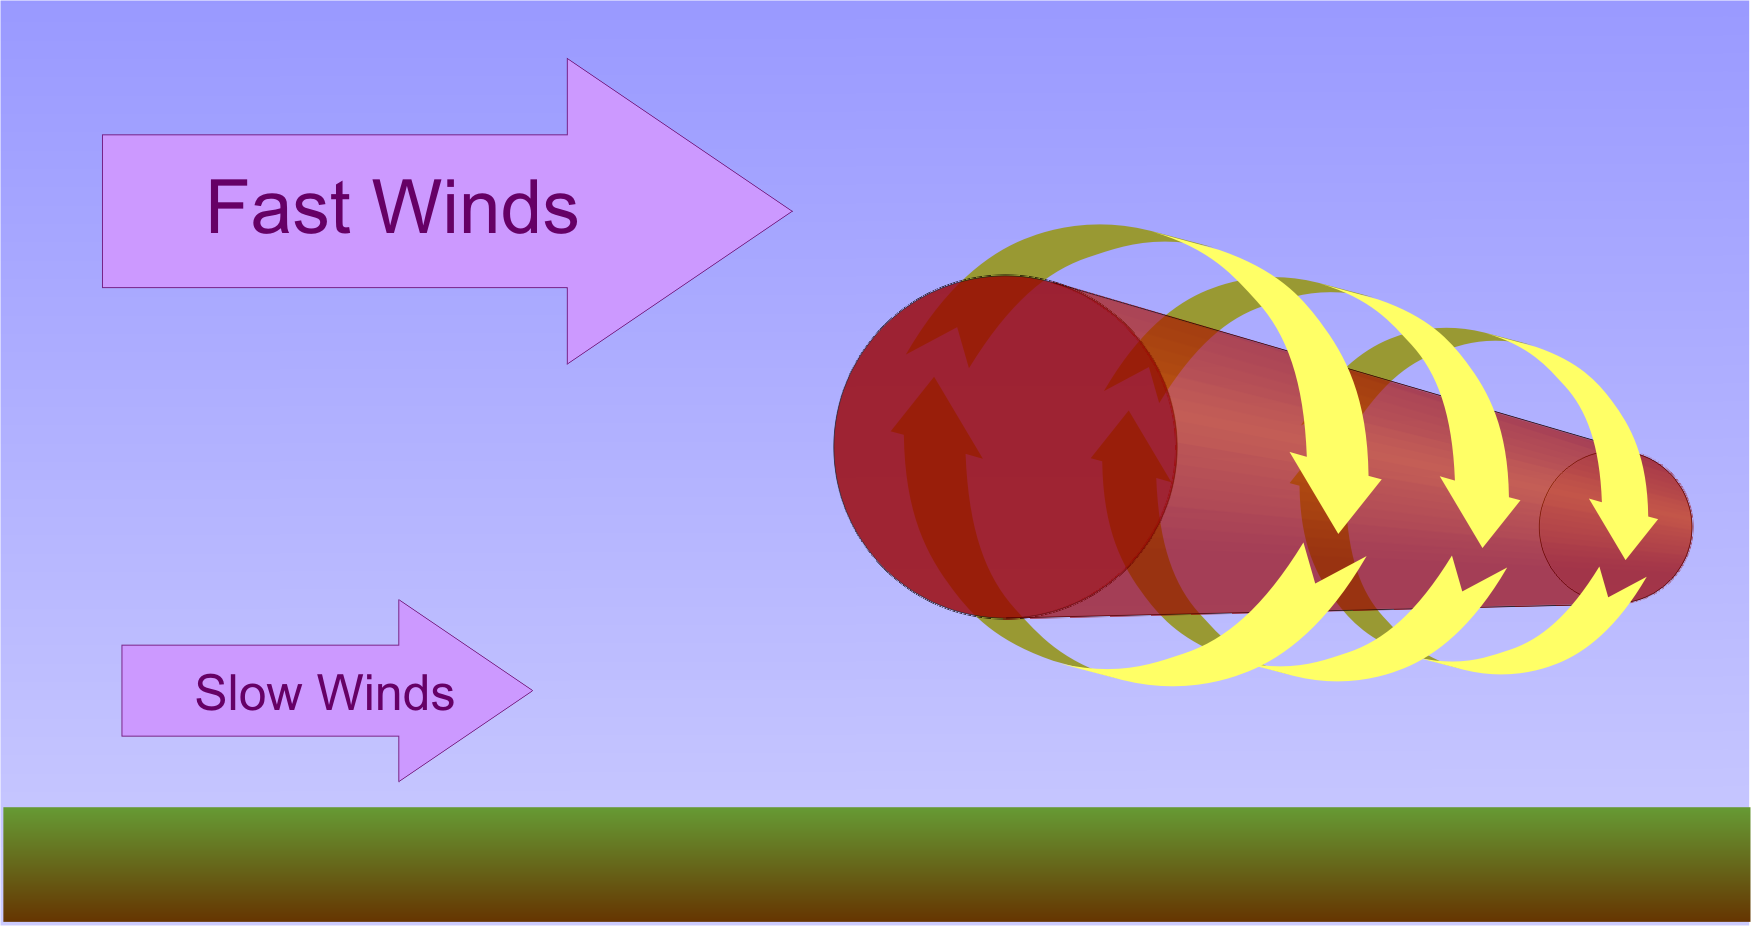 Horizontal roll met by strong, fast winds at comparatively high altitude and slower, weaker winds at lower altitude.